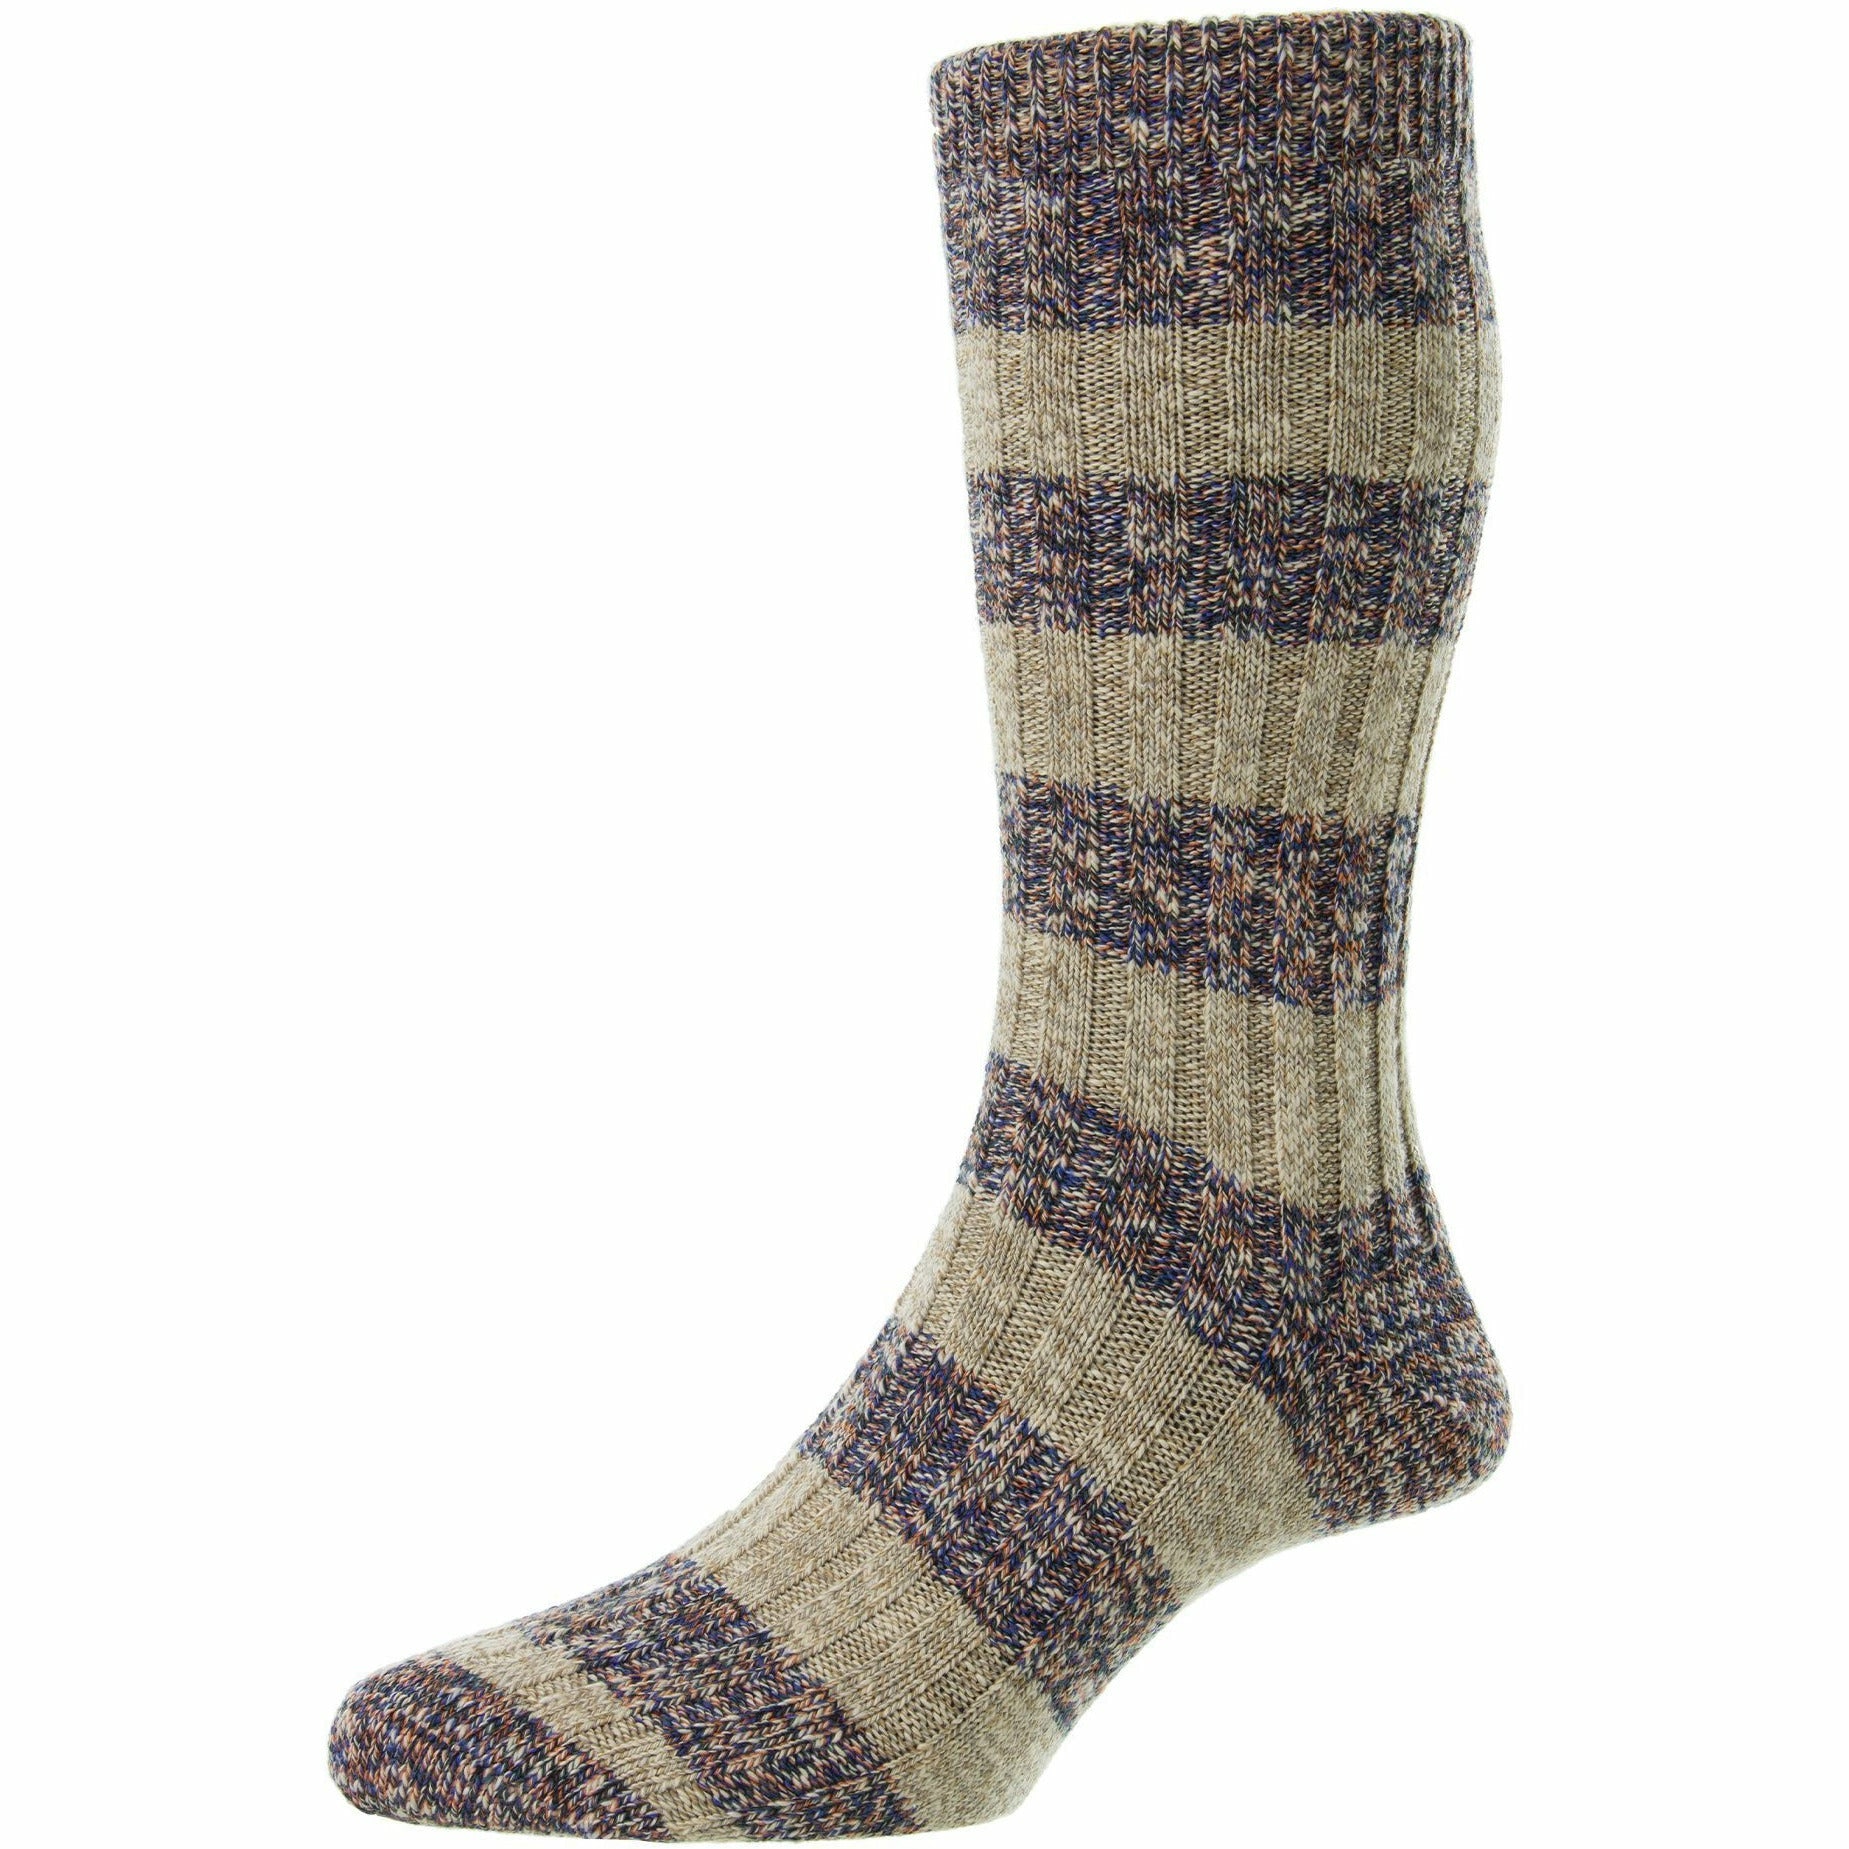 Rockley Recycled Cotton Mid-Calf Dress Socks